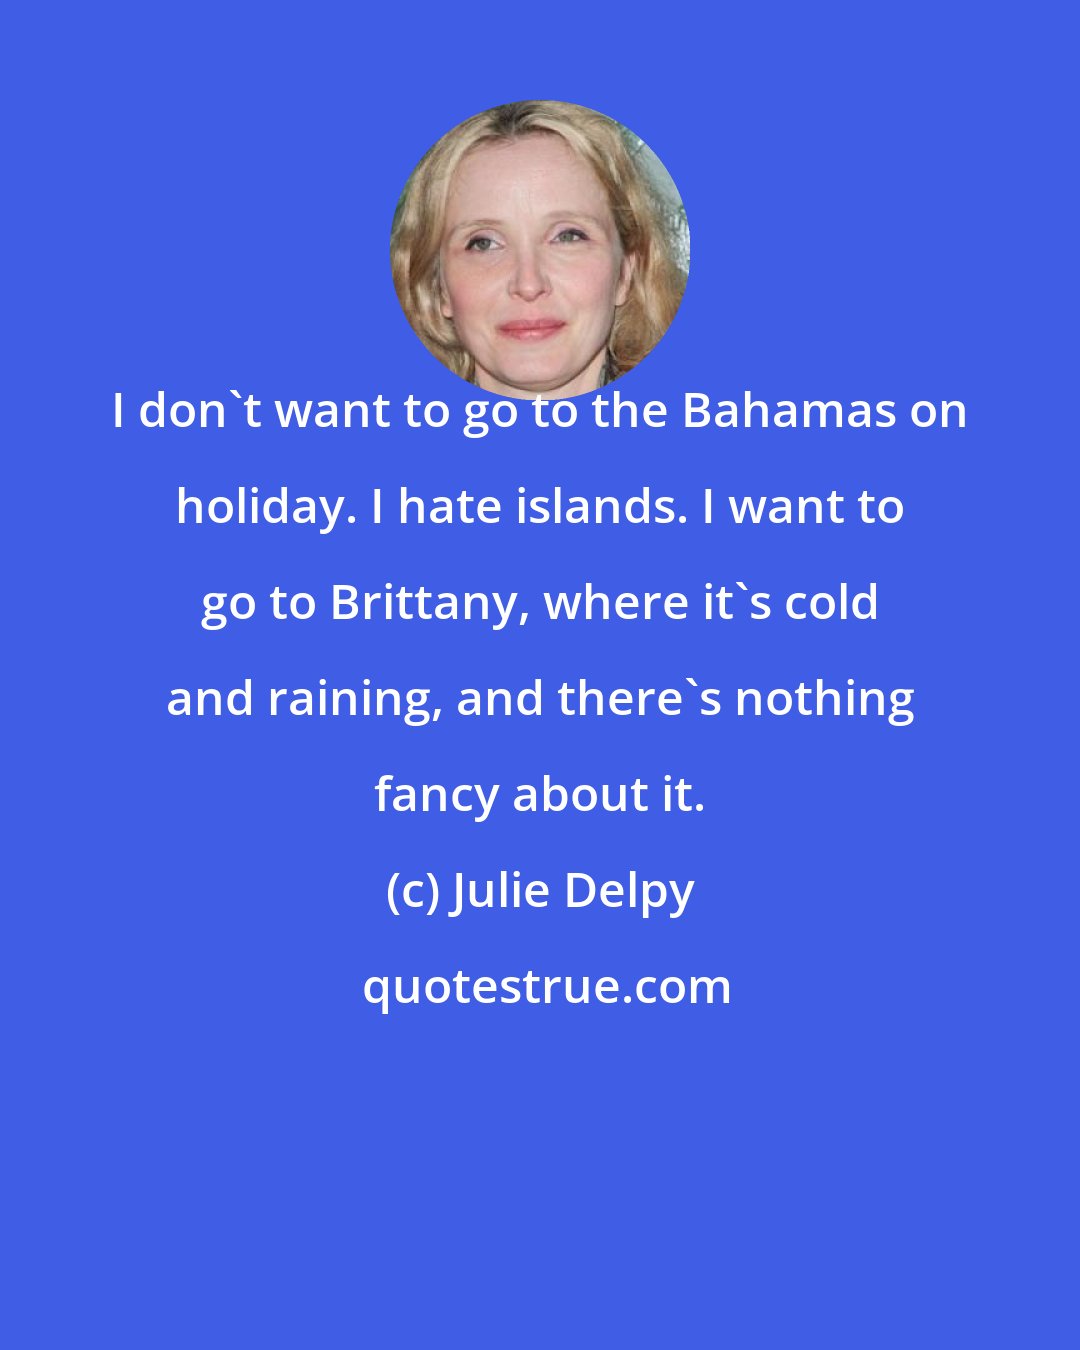 Julie Delpy: I don't want to go to the Bahamas on holiday. I hate islands. I want to go to Brittany, where it's cold and raining, and there's nothing fancy about it.